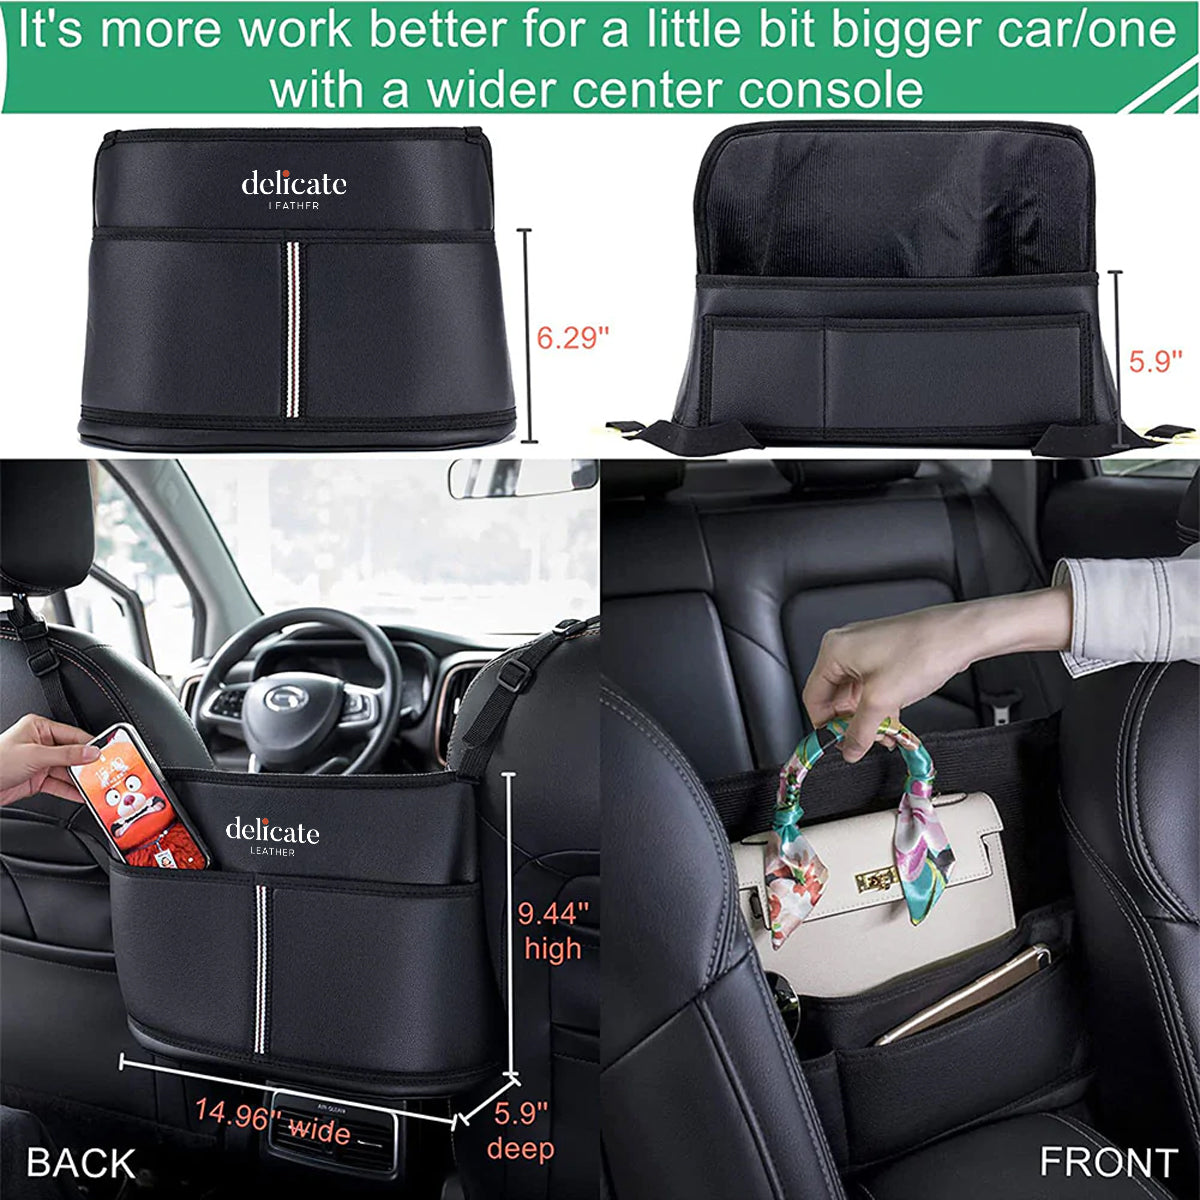 Delicate Leather Car Purse Holder for Car Handbag Holder Between Seats Premium PU Leather, Custom Fit For Your Cars, Auto Driver Or Passenger Accessories Organizer, Hanging Car Purse Storage Pocket Back Seat Pet Barrier VE11991 - Delicate Leather